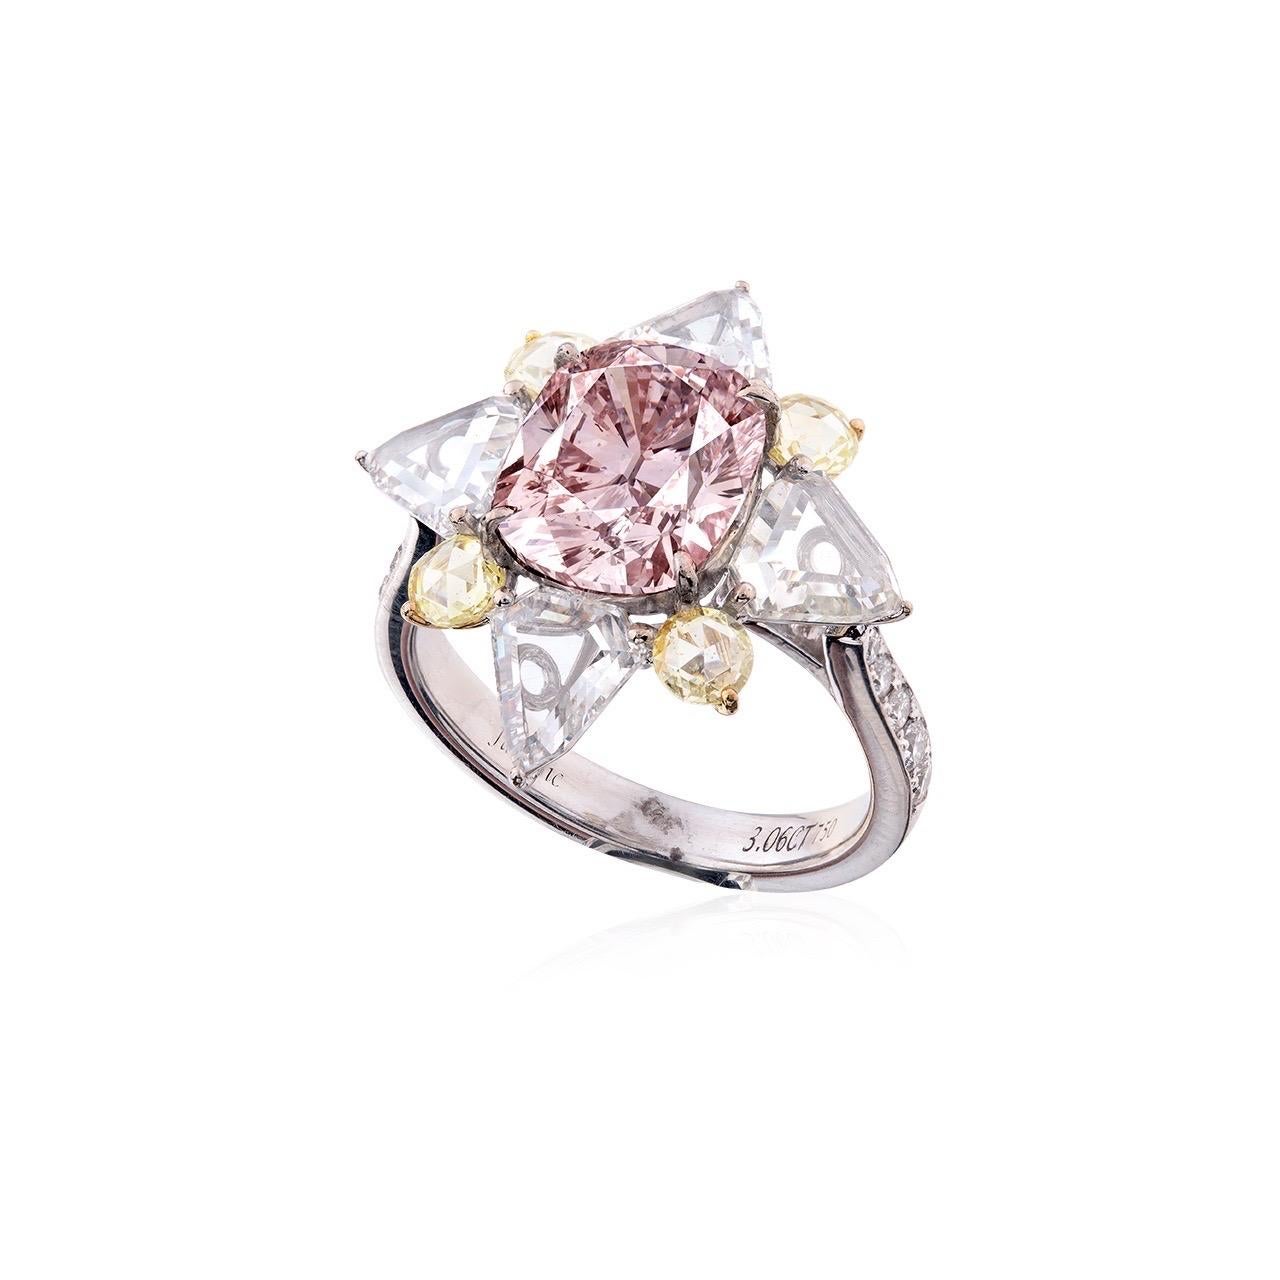 Emilio Jewelry Gia Certified 3.20 Carat Light Pink Diamond Ring  In New Condition For Sale In New York, NY